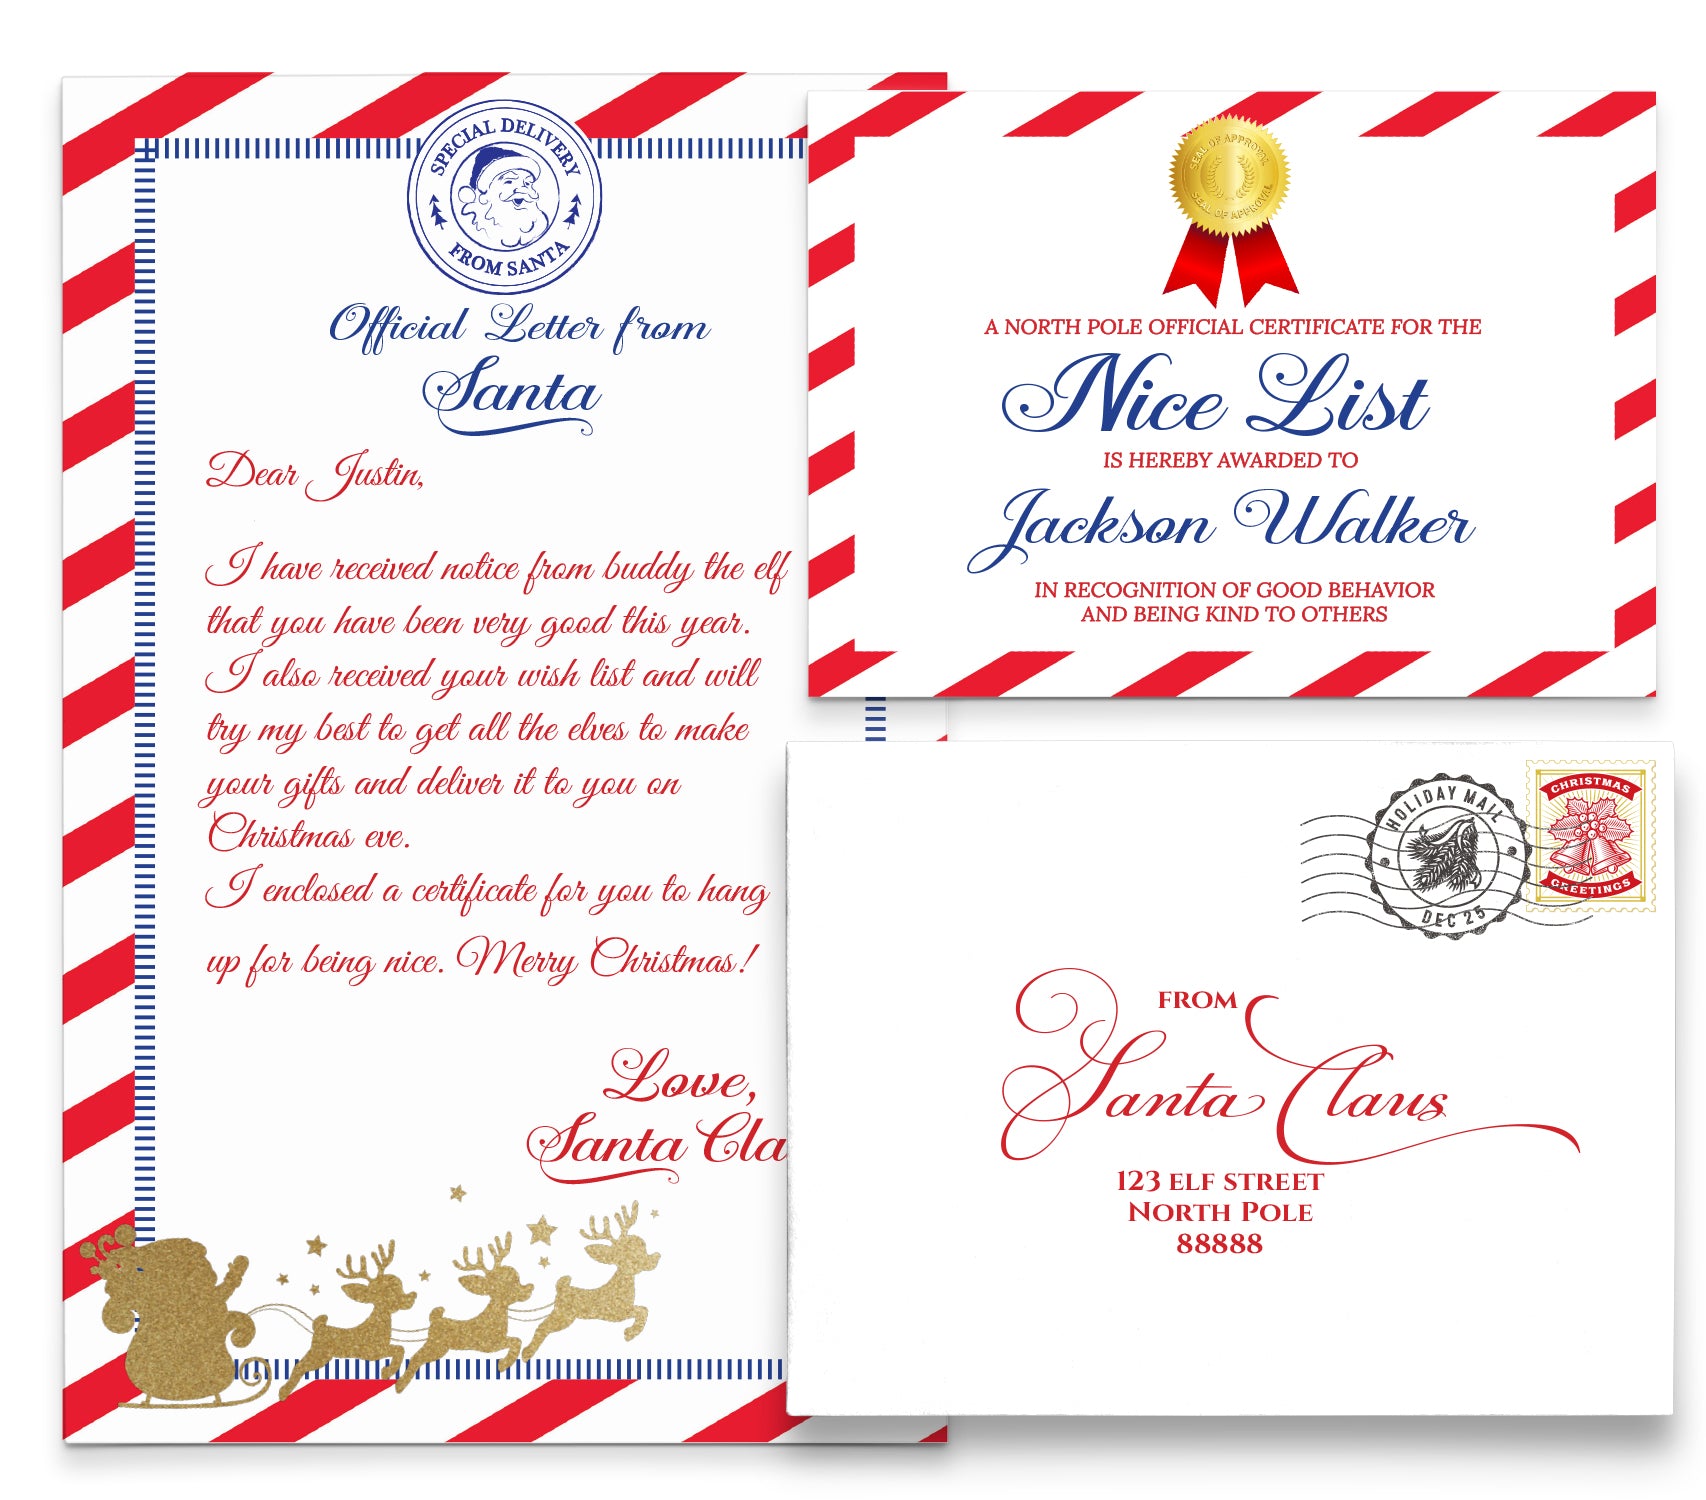 Personalized Christmas Santa Letters